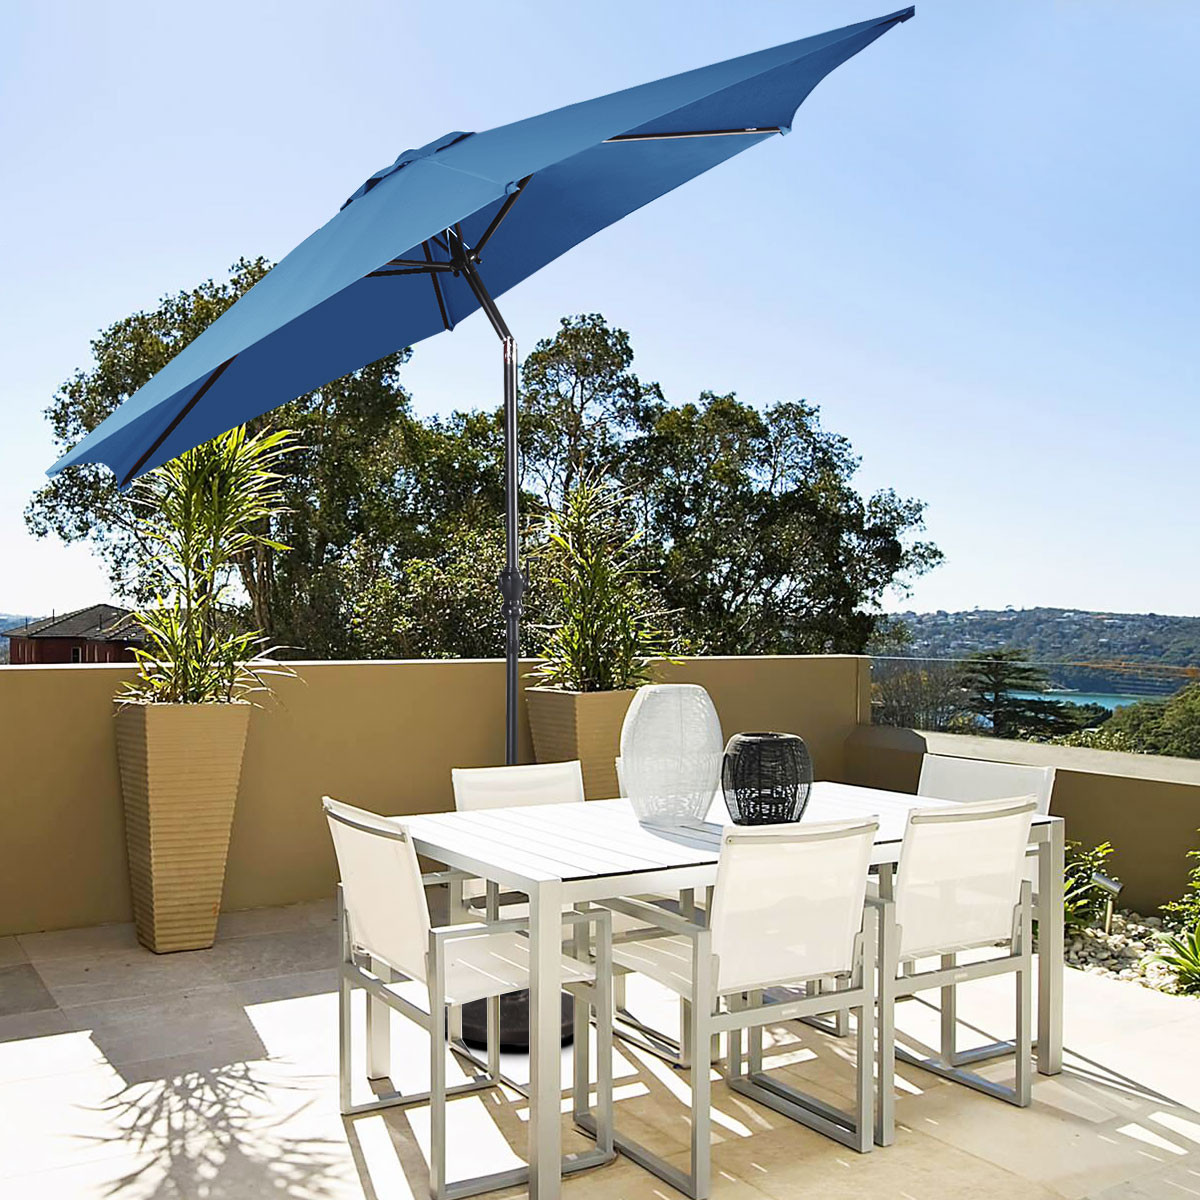 what are the matching methods for outdoor sunshade umbrellas?